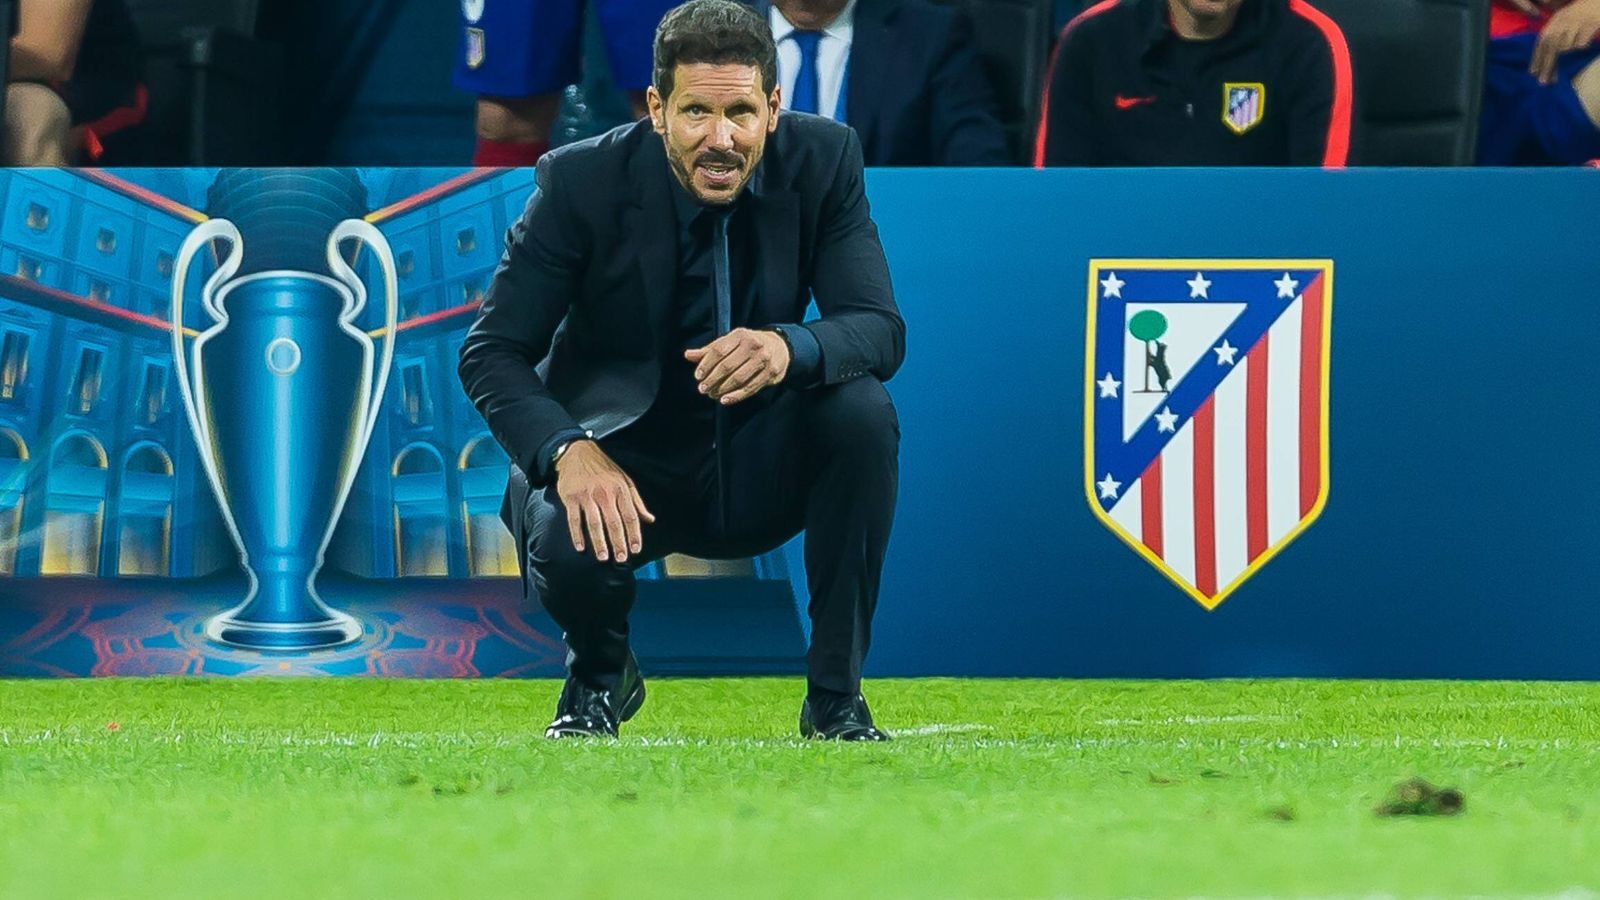 Atletico Madrid Manager Simeone on Facing RB Leipzig in the Champions League Quarter-finals